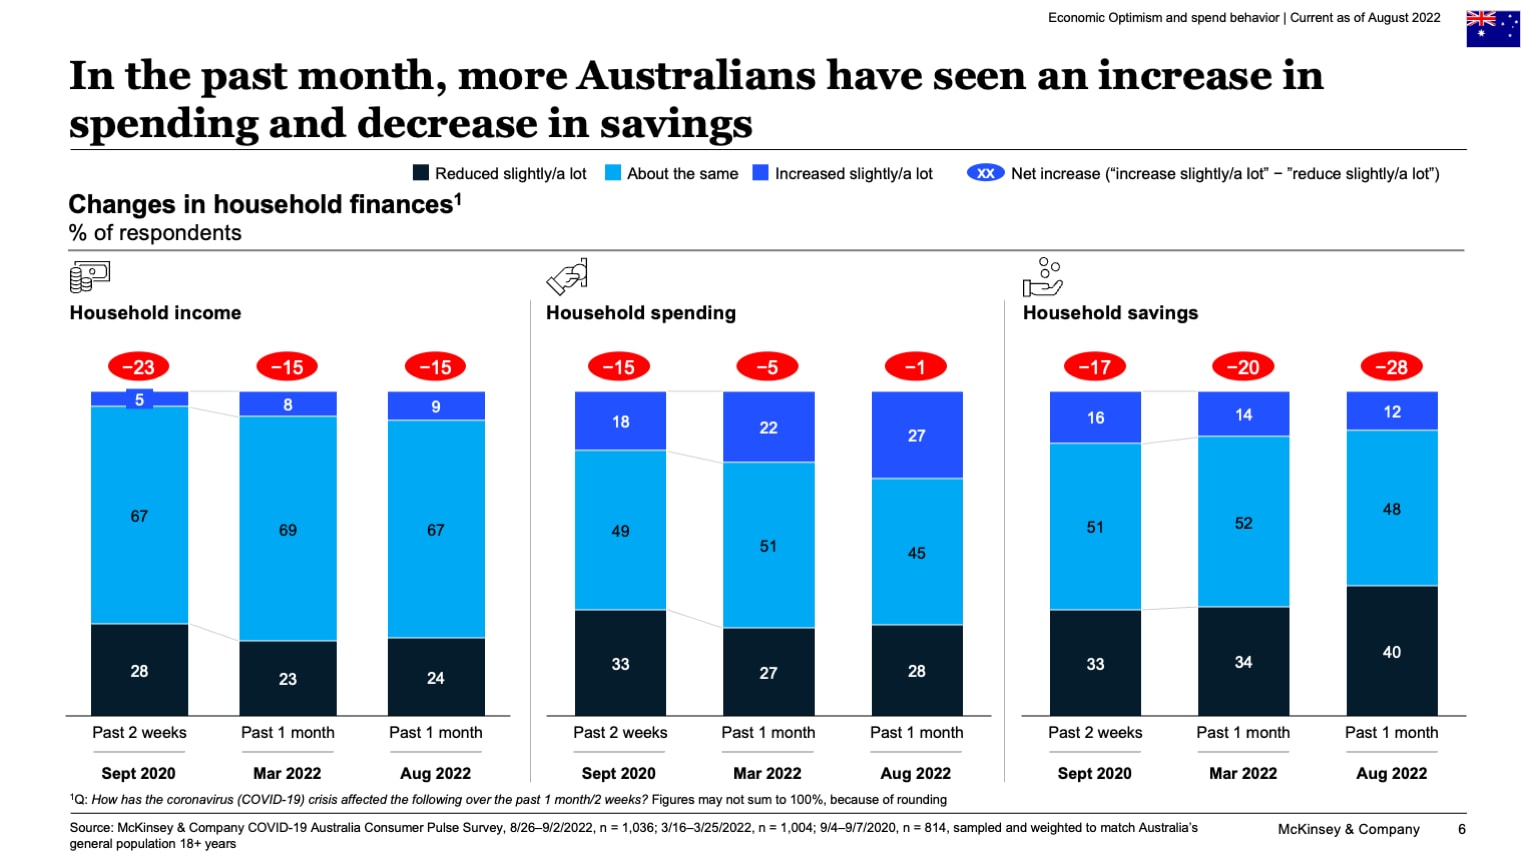 In the past month, more Australians have seen an increase in spending and decrease in savings